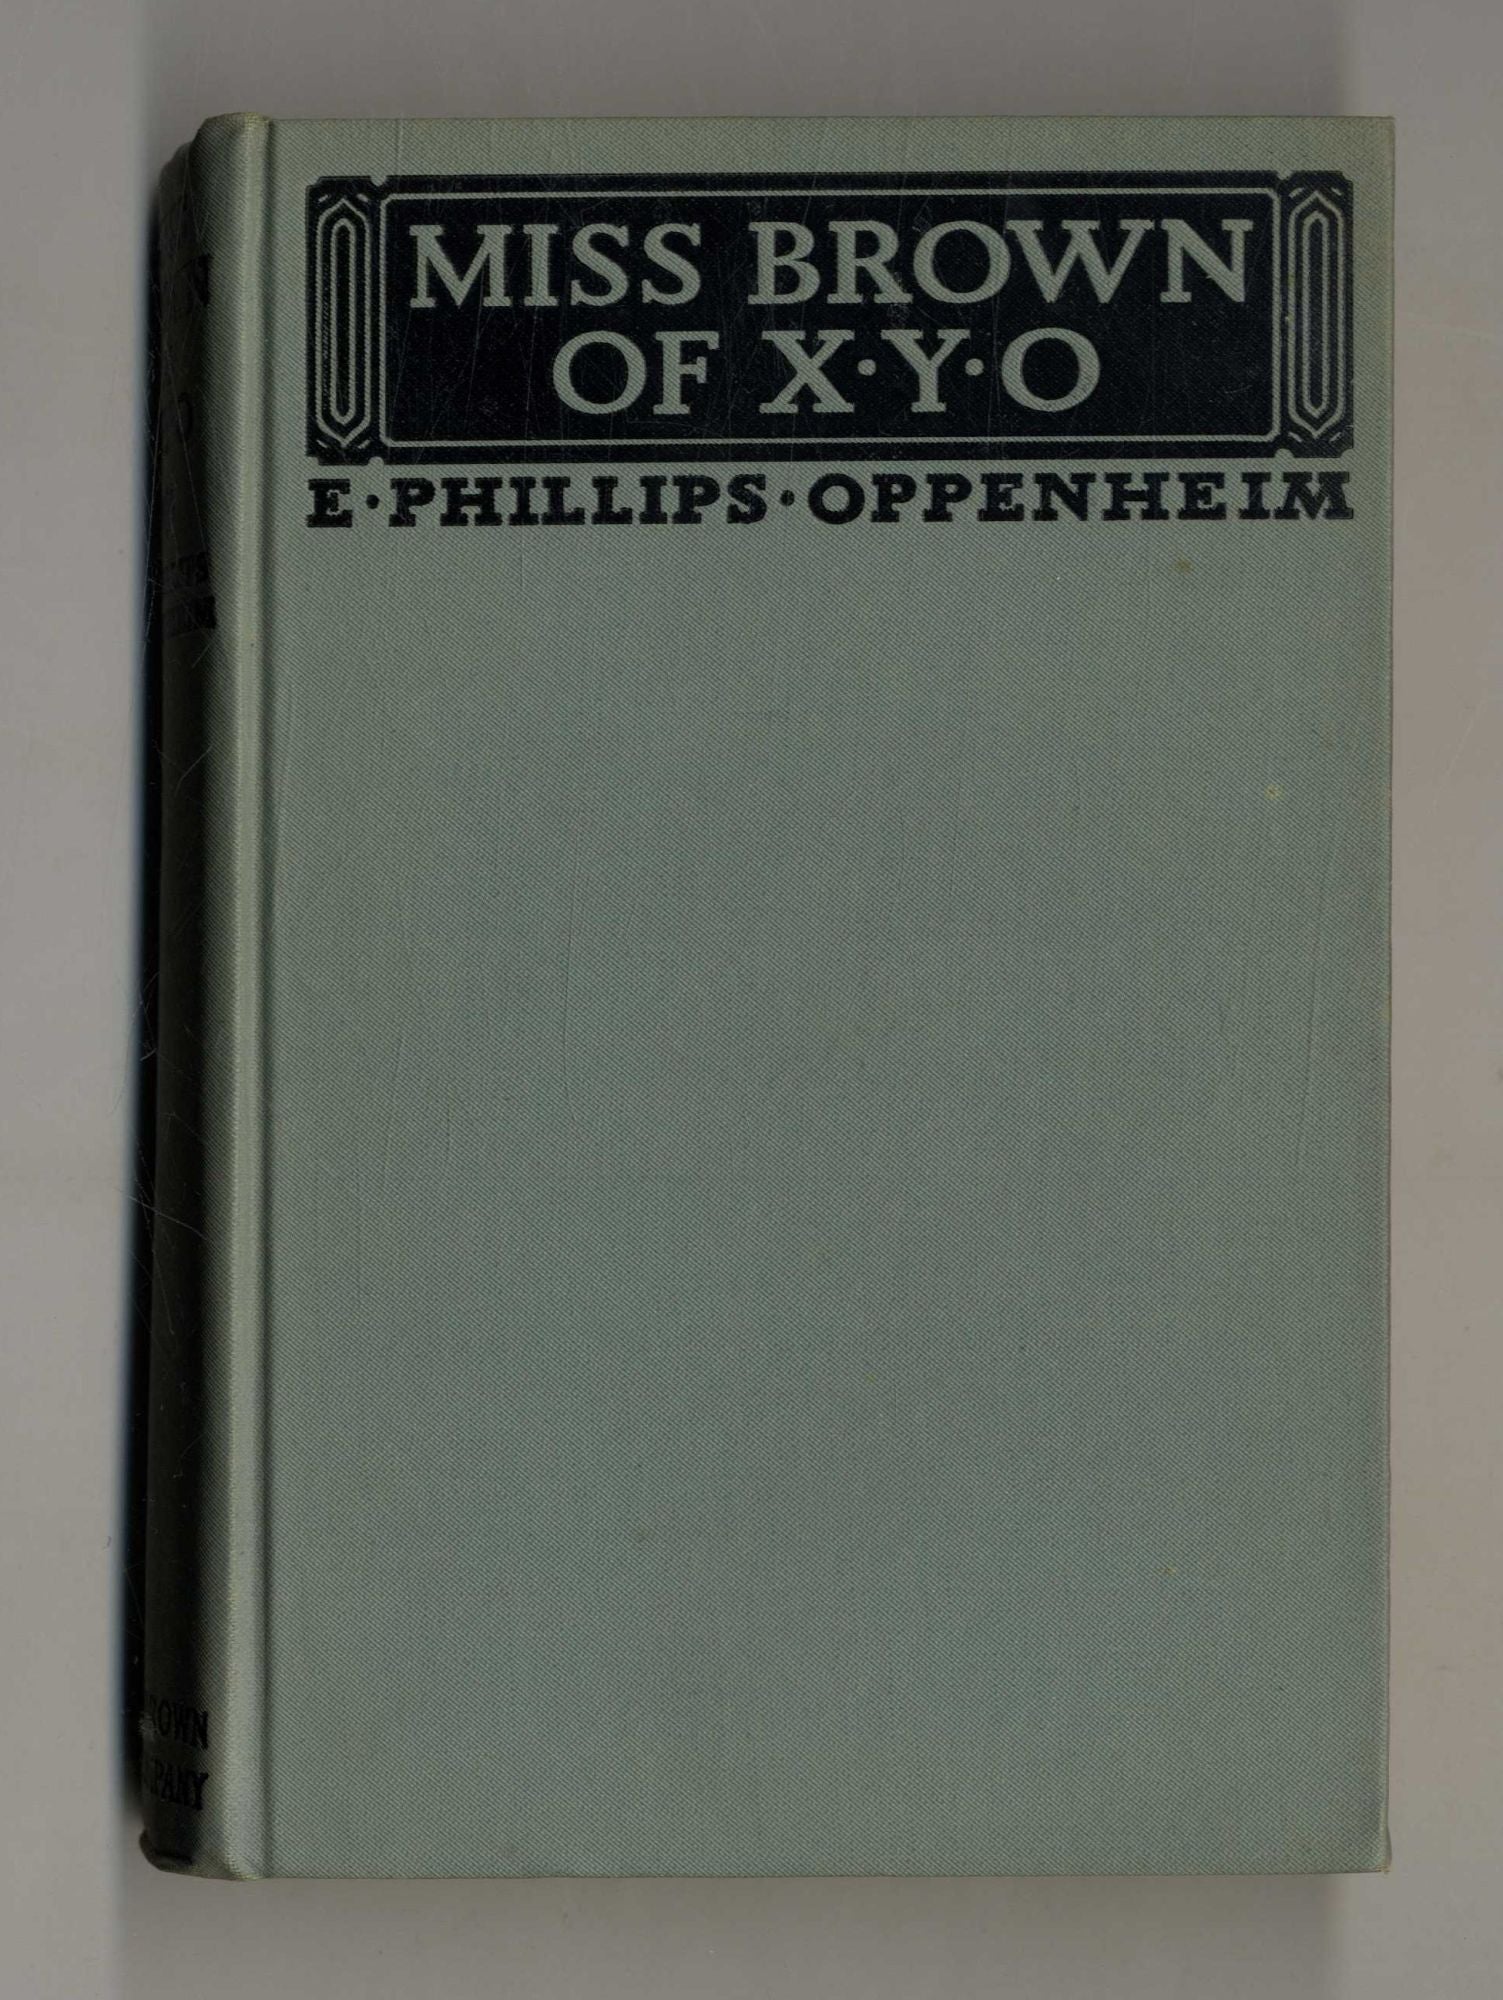 Book #160081 Miss Brown of X. Y. O. E. Phillips Oppenheim.